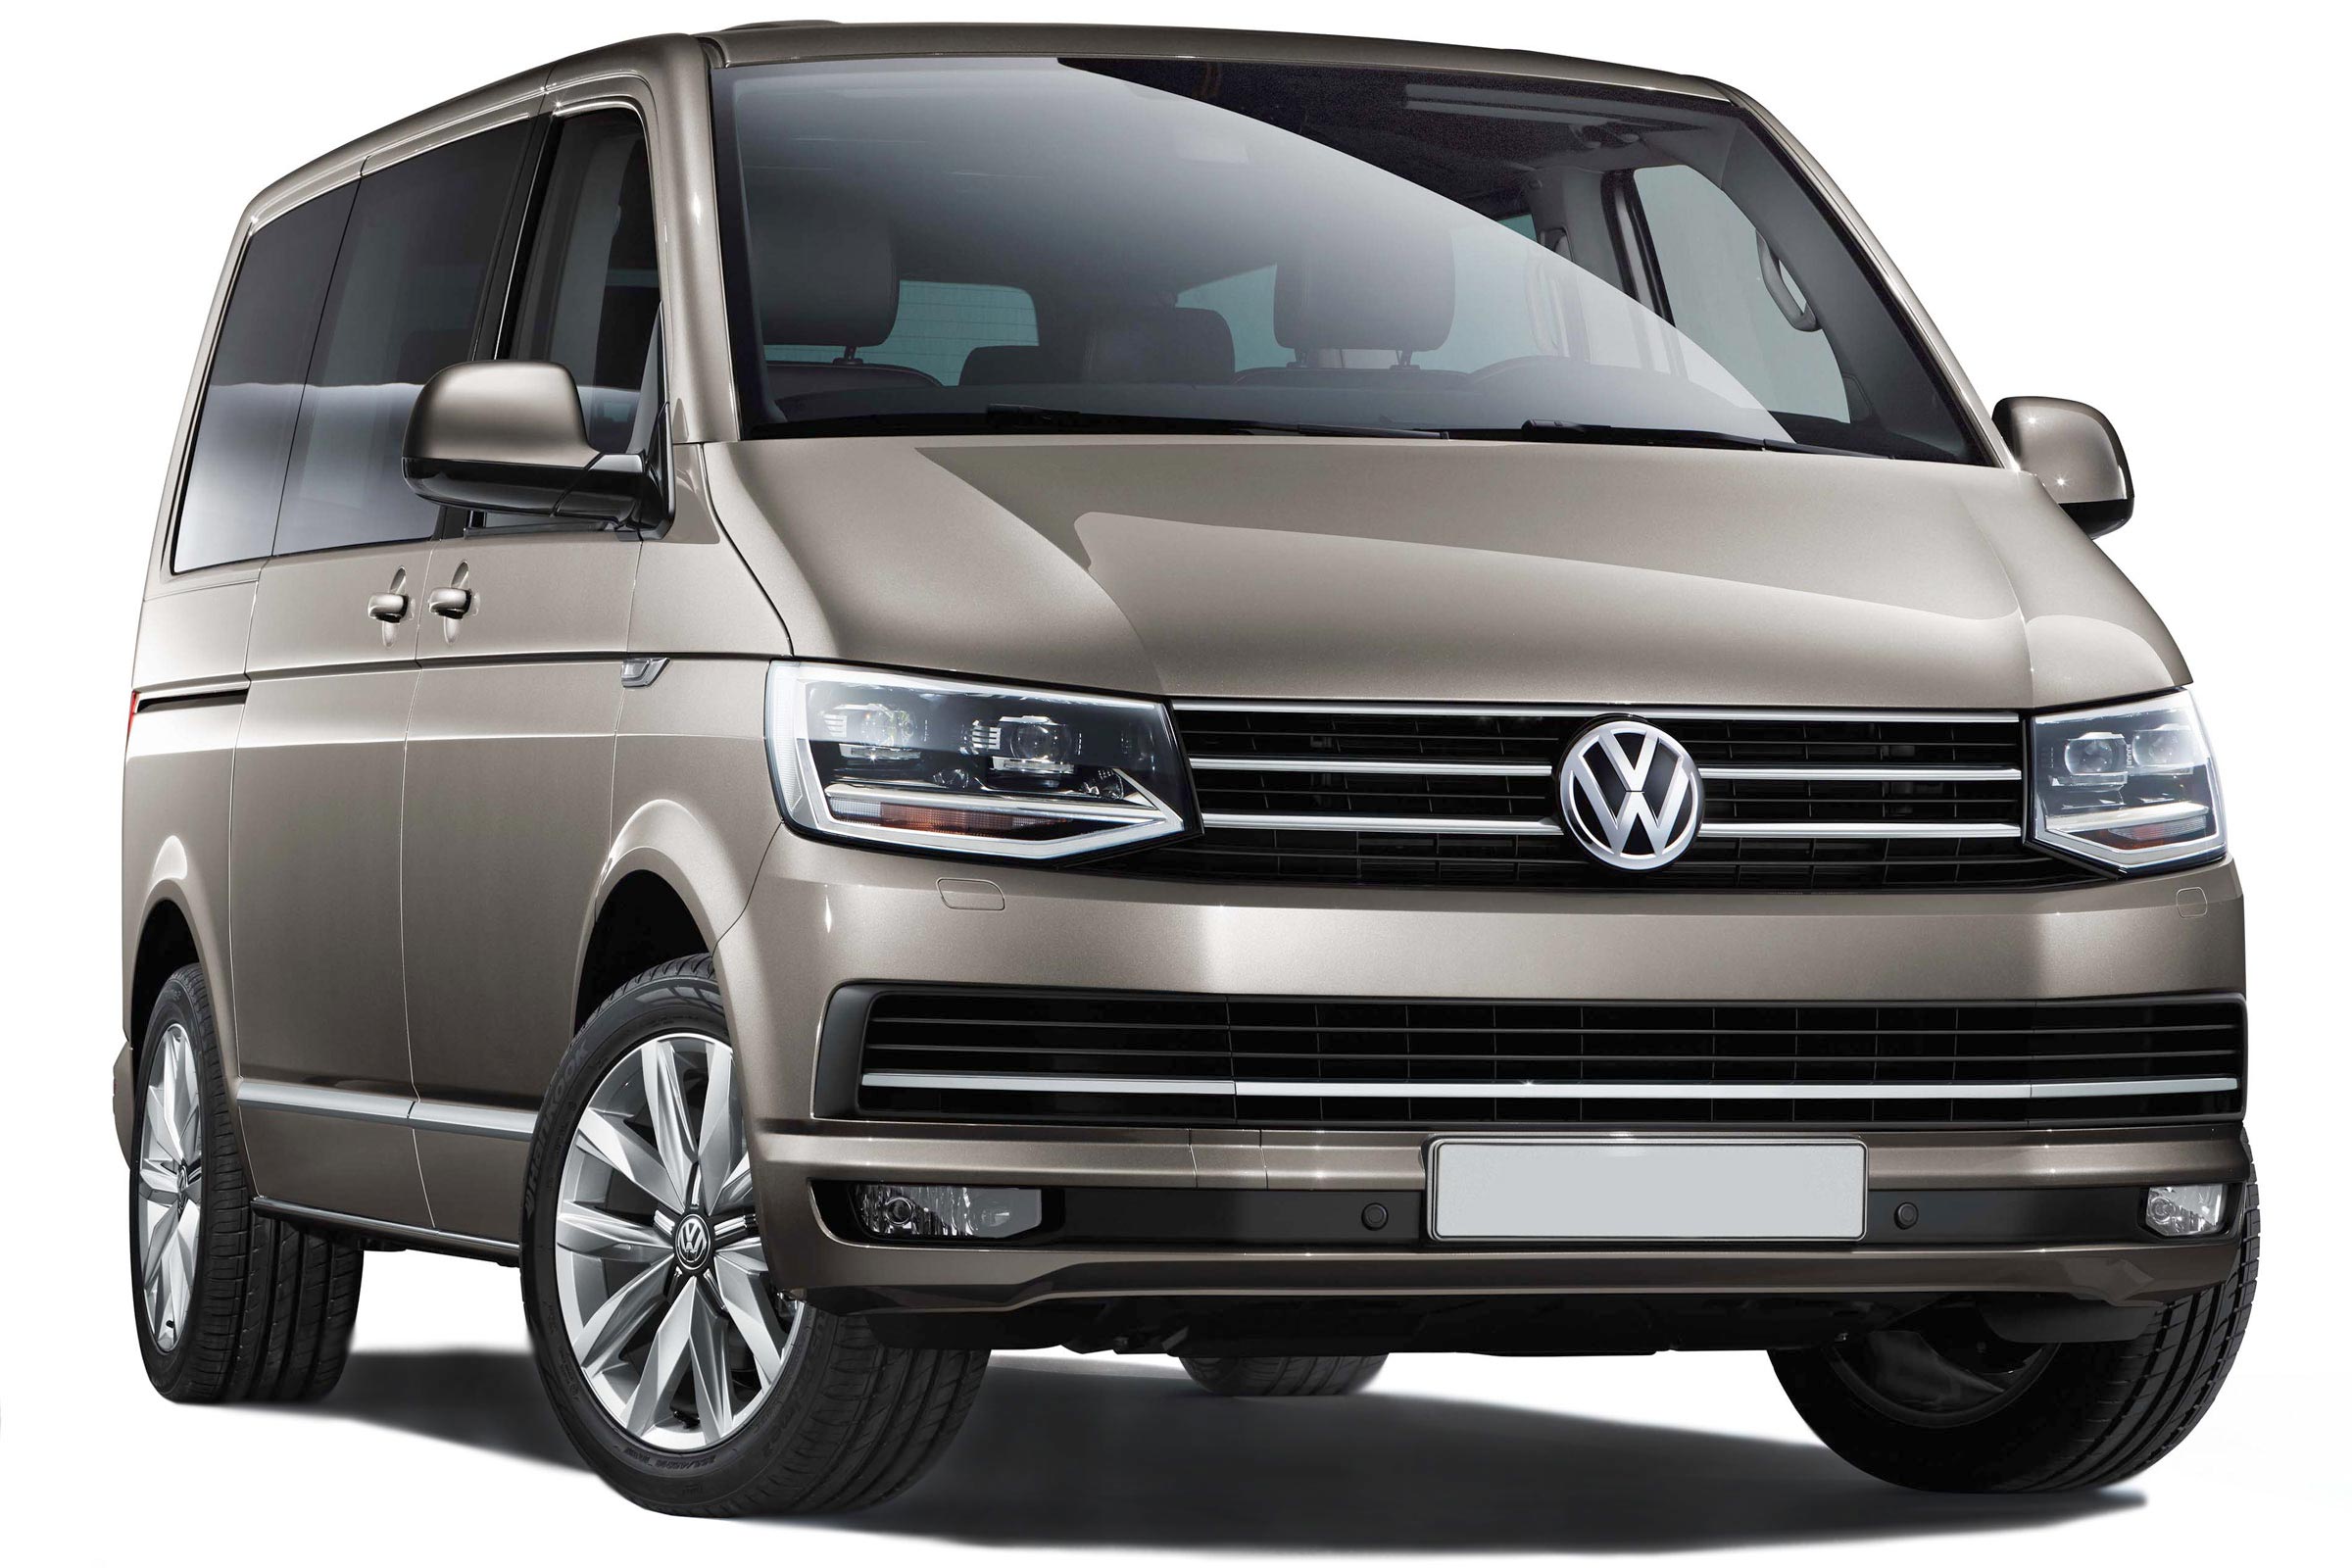 Volkswagen Caravelle MPV 2020 review Carbuyer